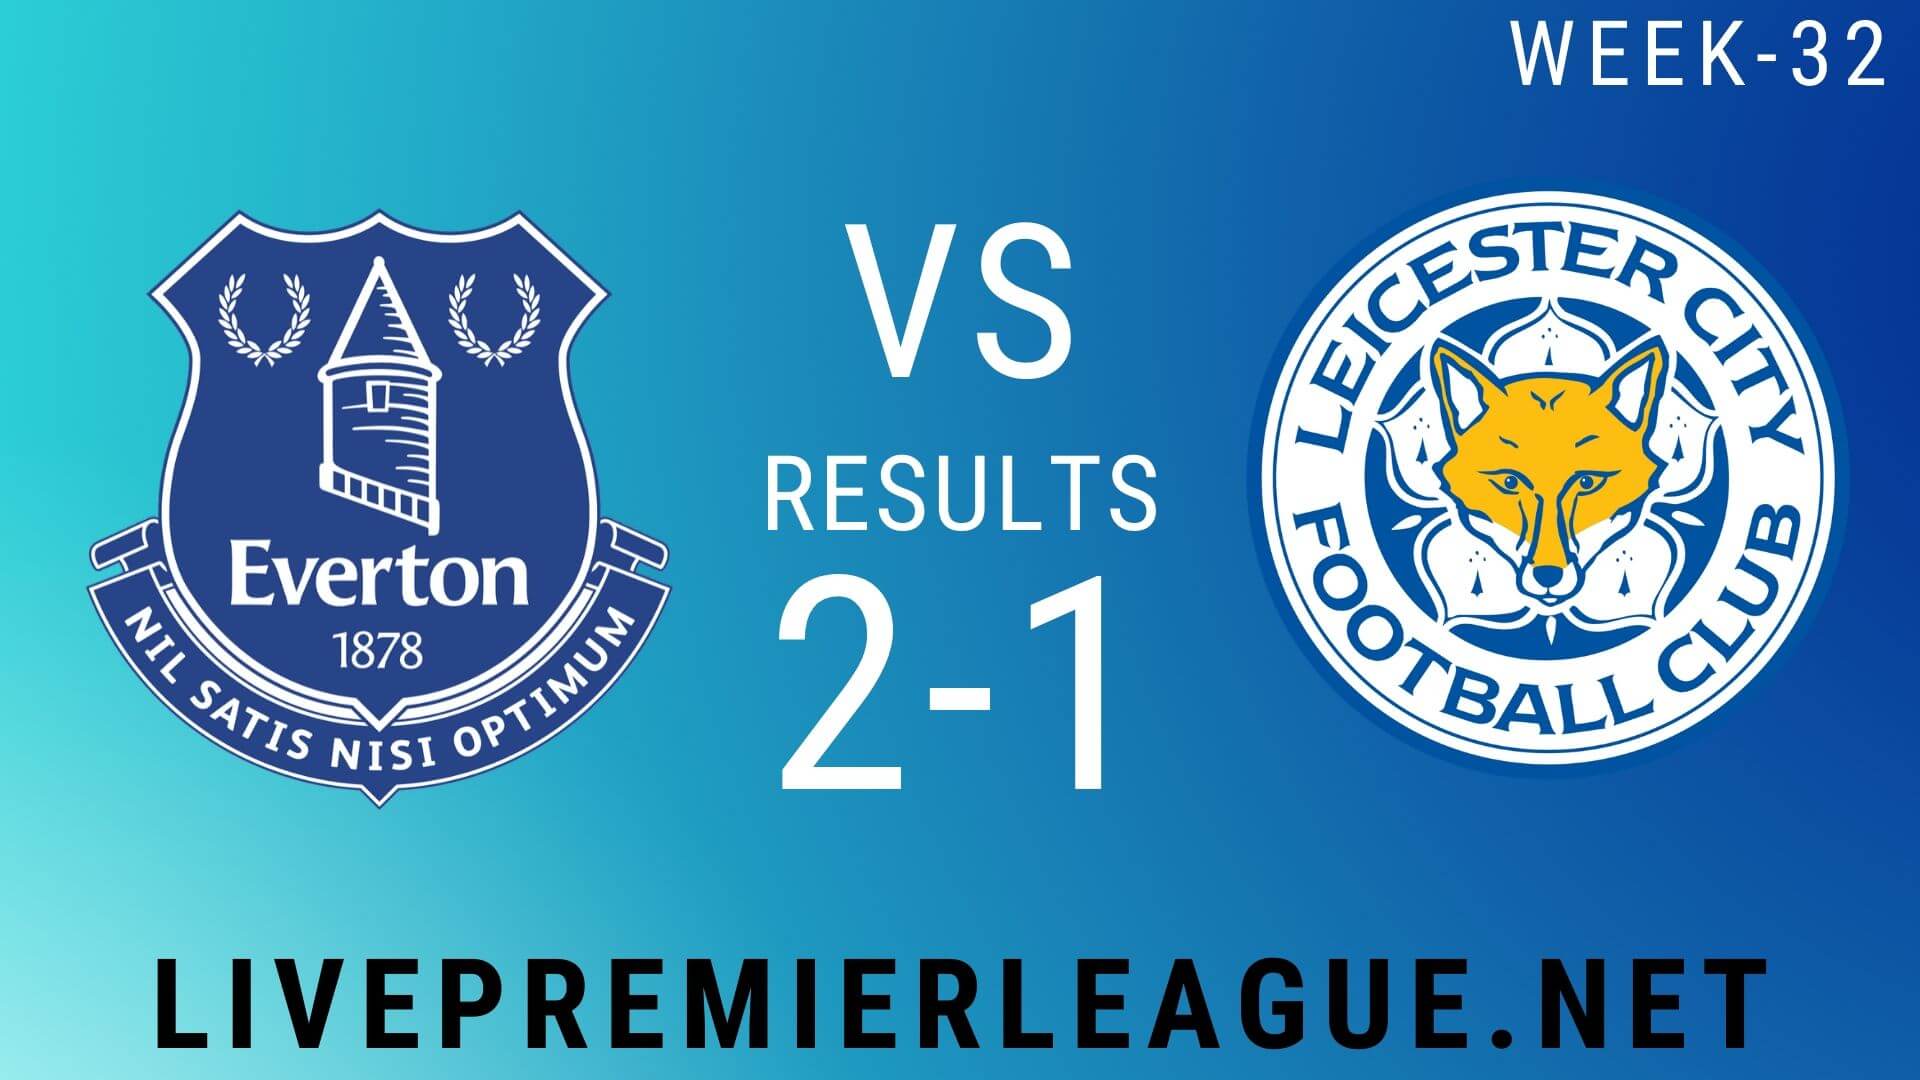 Everton Vs Leicester City | Week 32 Result 2020